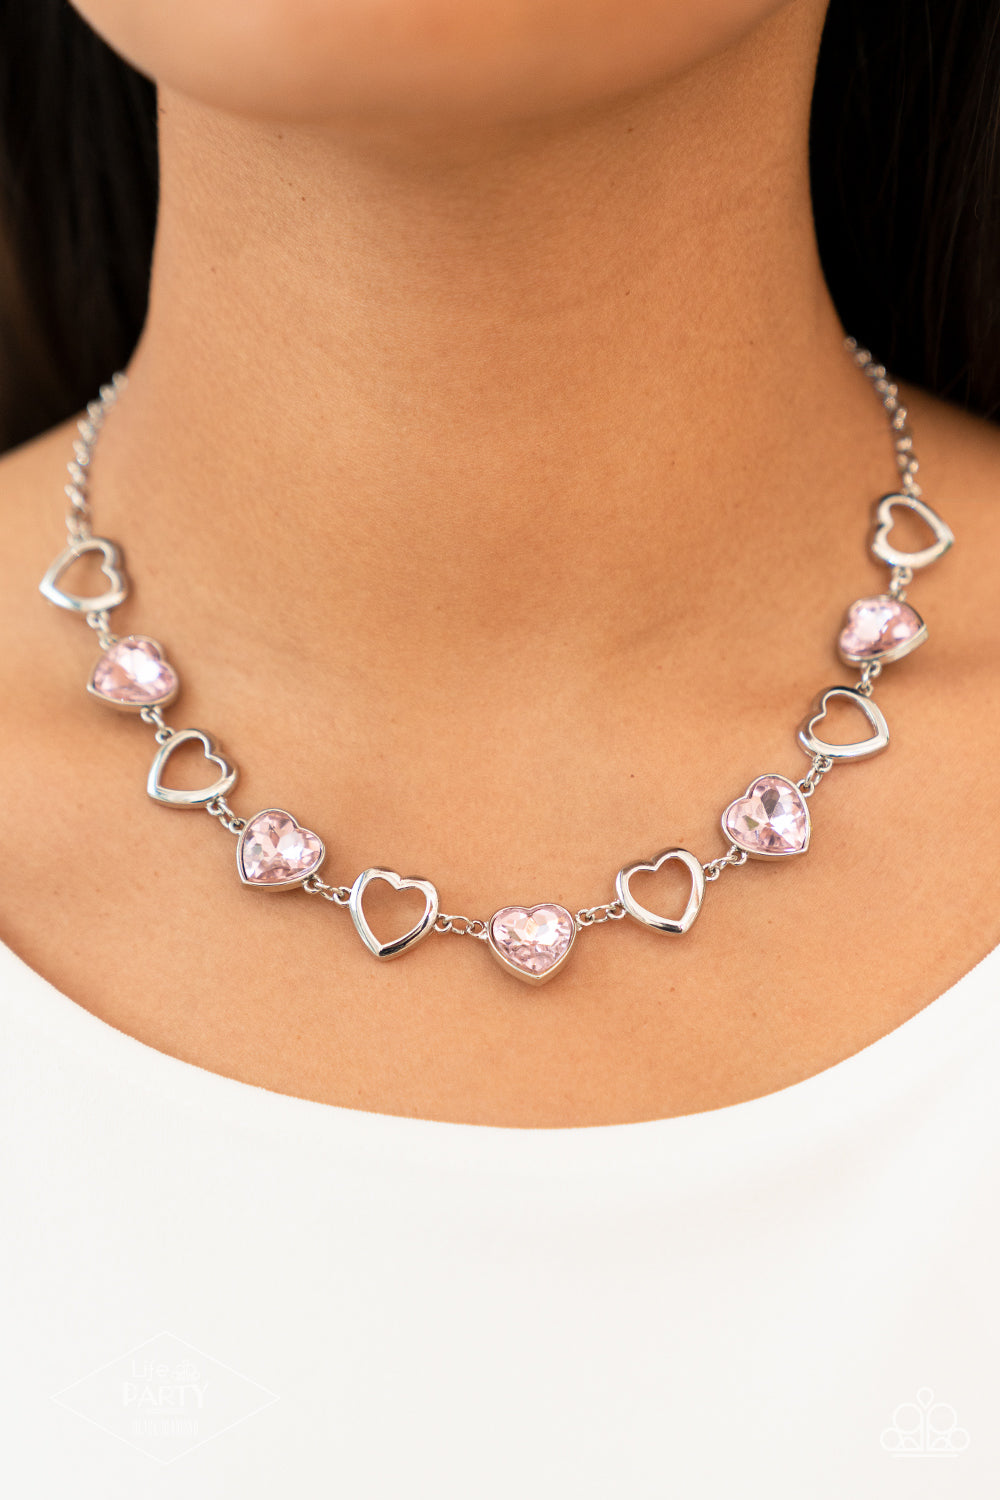 Paparazzi Accessories Contemporary Cupid - Pink Shiny, silver silhouette hearts alternate between faceted pink heart gems pressed into silver frames.The high-sheen and sparkly display coalesce around the collar for a cupid-like charm. Features an adjustab